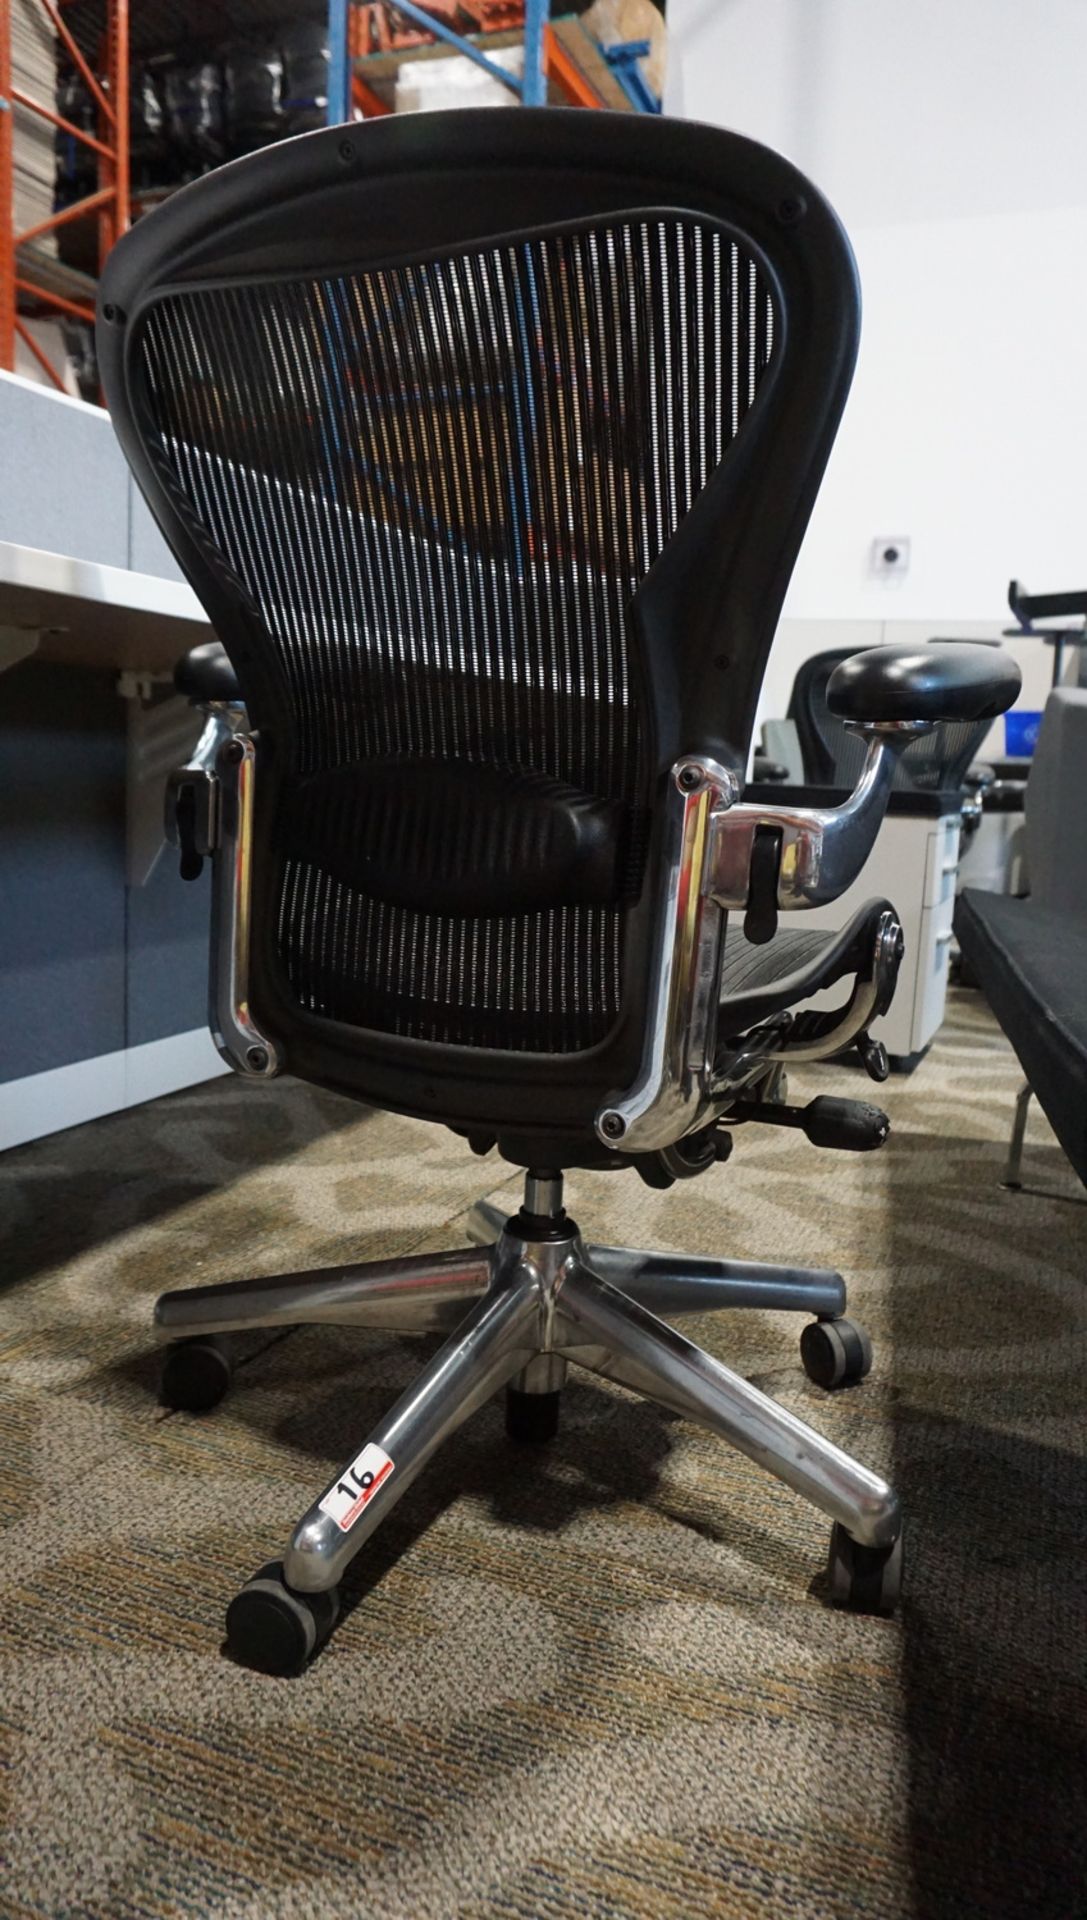 HERMAN MILLER AERON (SIZE B) OFFICE CHAIR W/ POLISHED ALUMINUM FRAME & BASE, LUMBAR SUPPORT, - Image 2 of 4